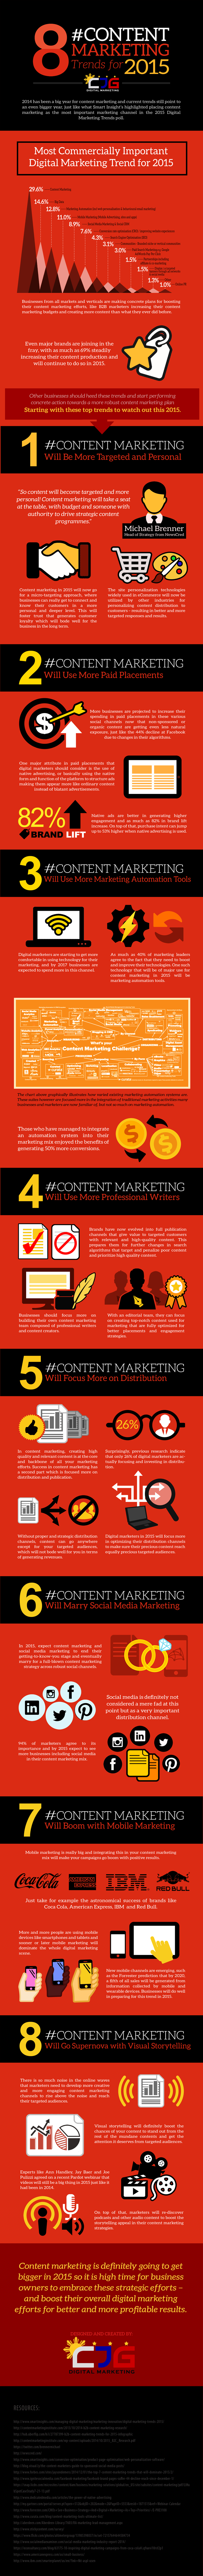 8 Content Marketing Trends for 2015 (Infographic) - An Infographic from CJG Digital Marketing